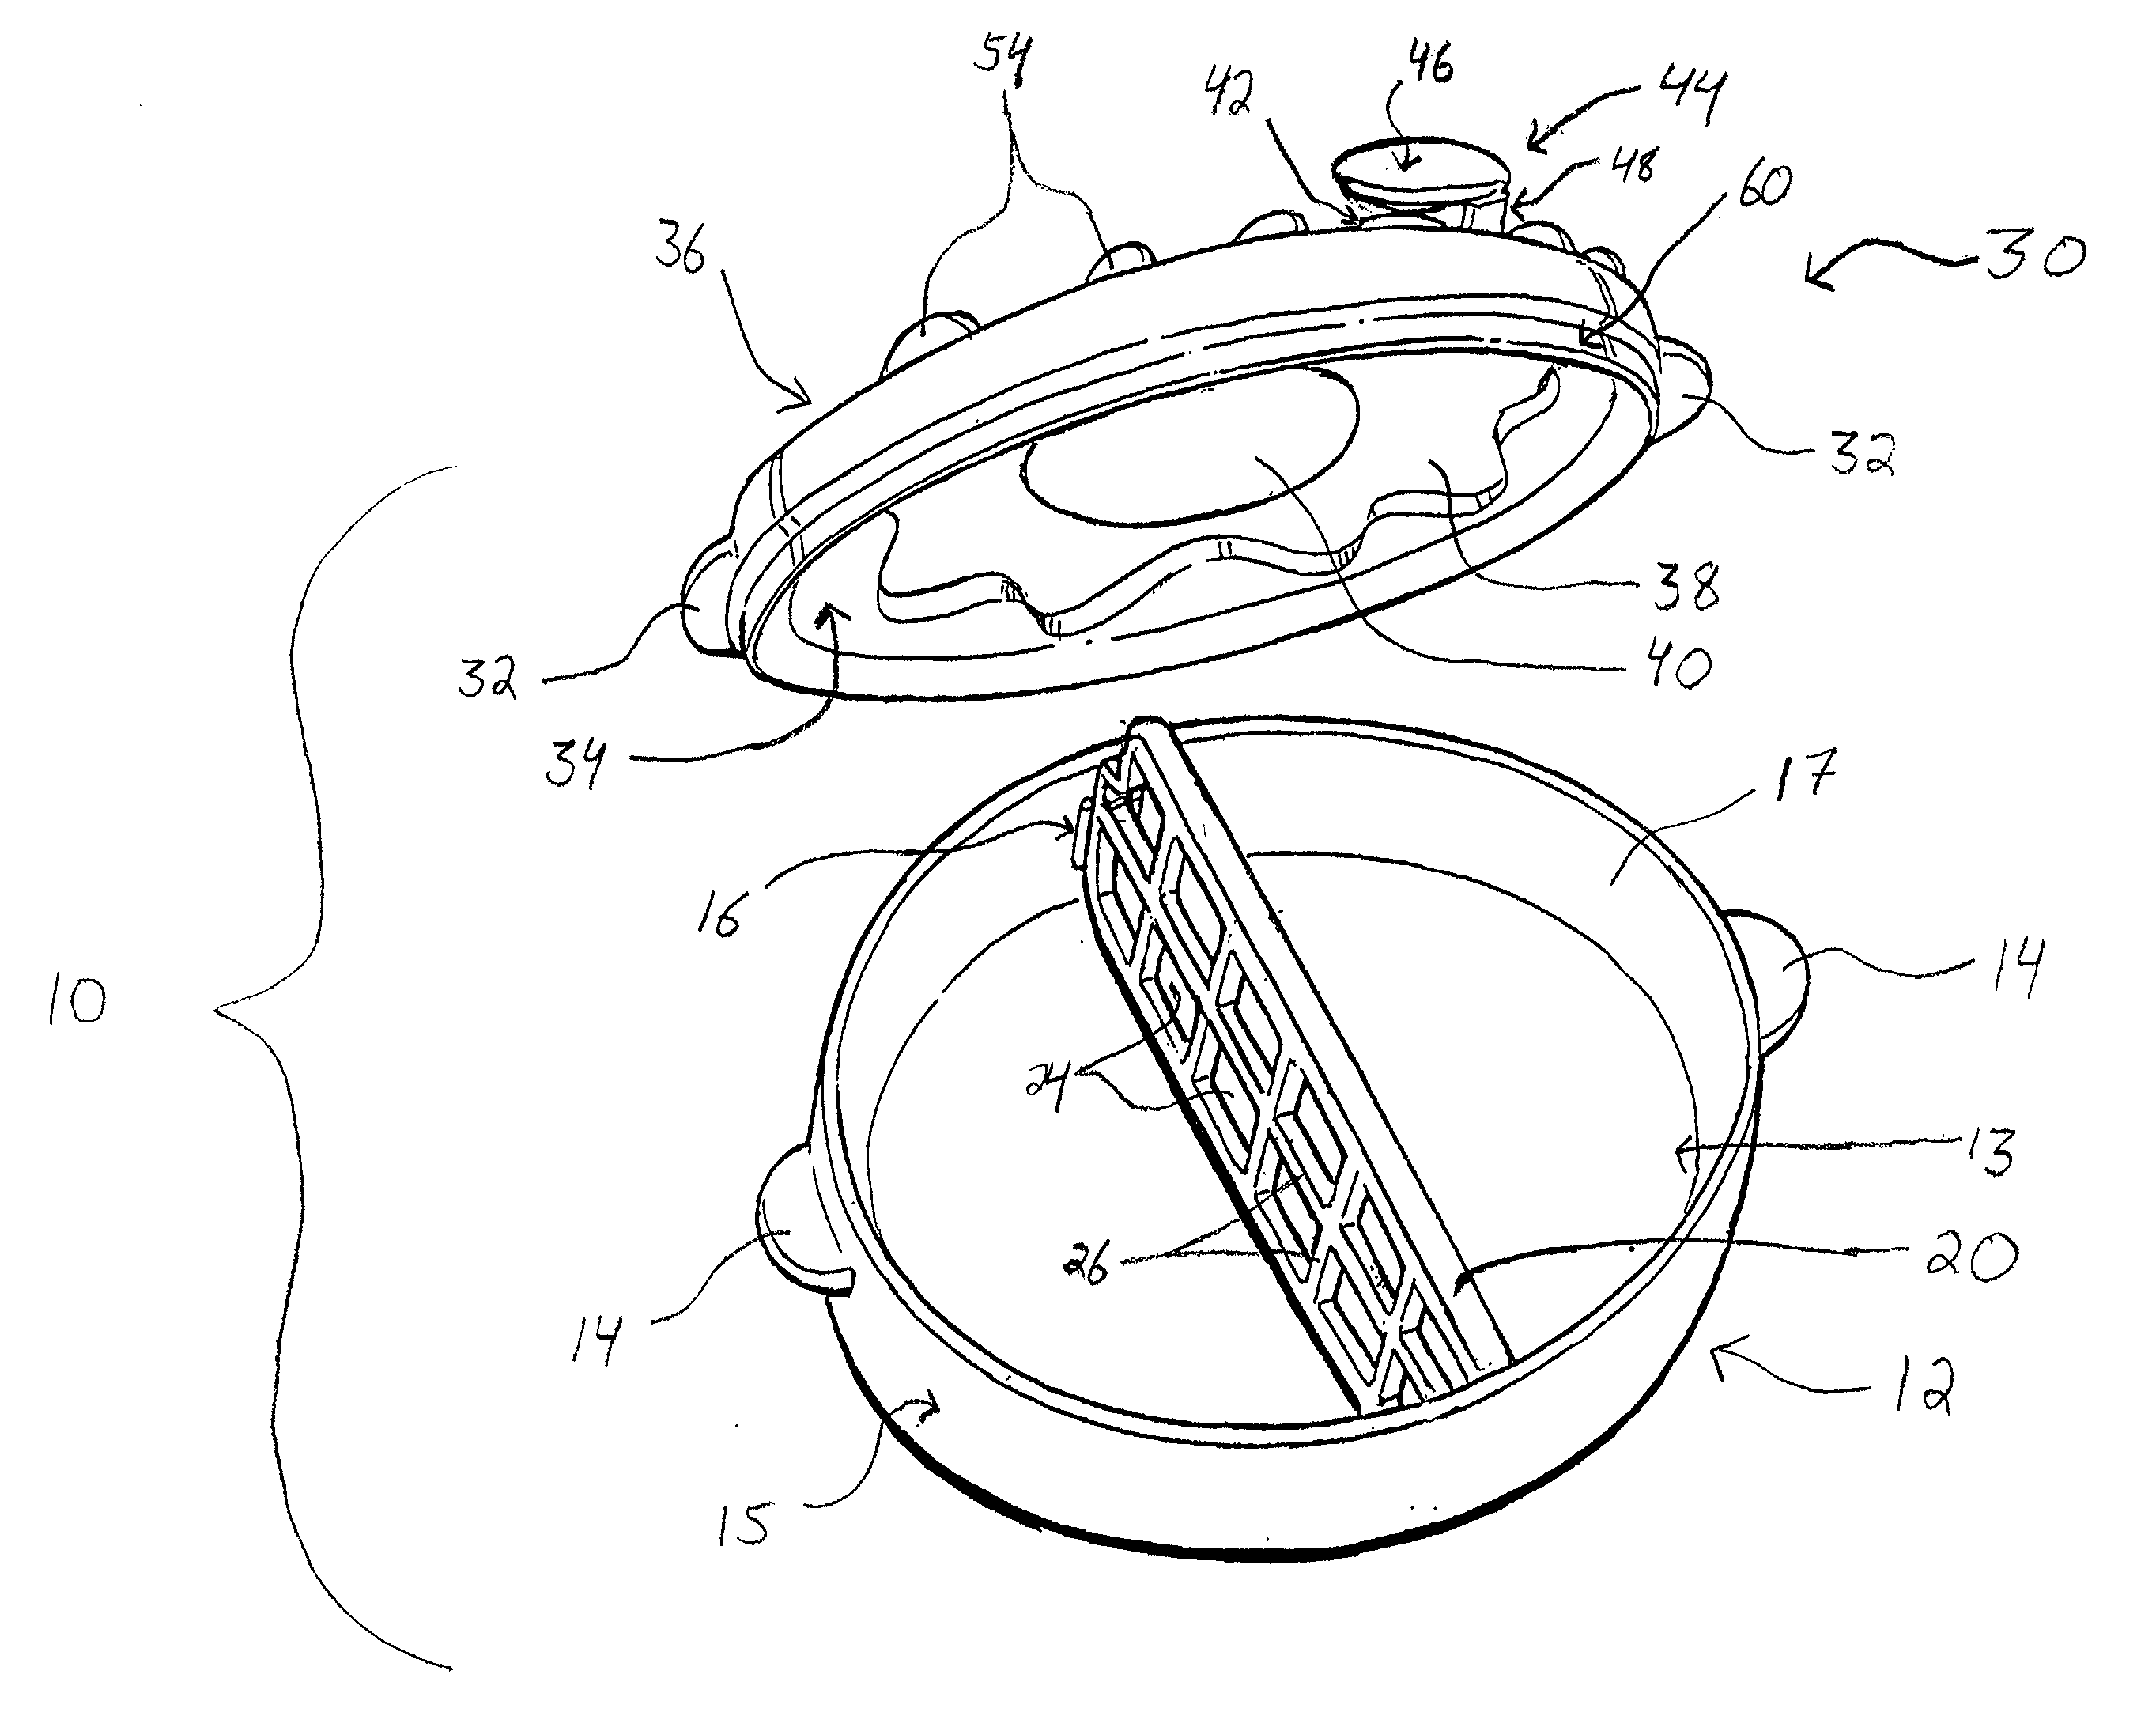 Egg, omelets and the like cooking method and apparatus